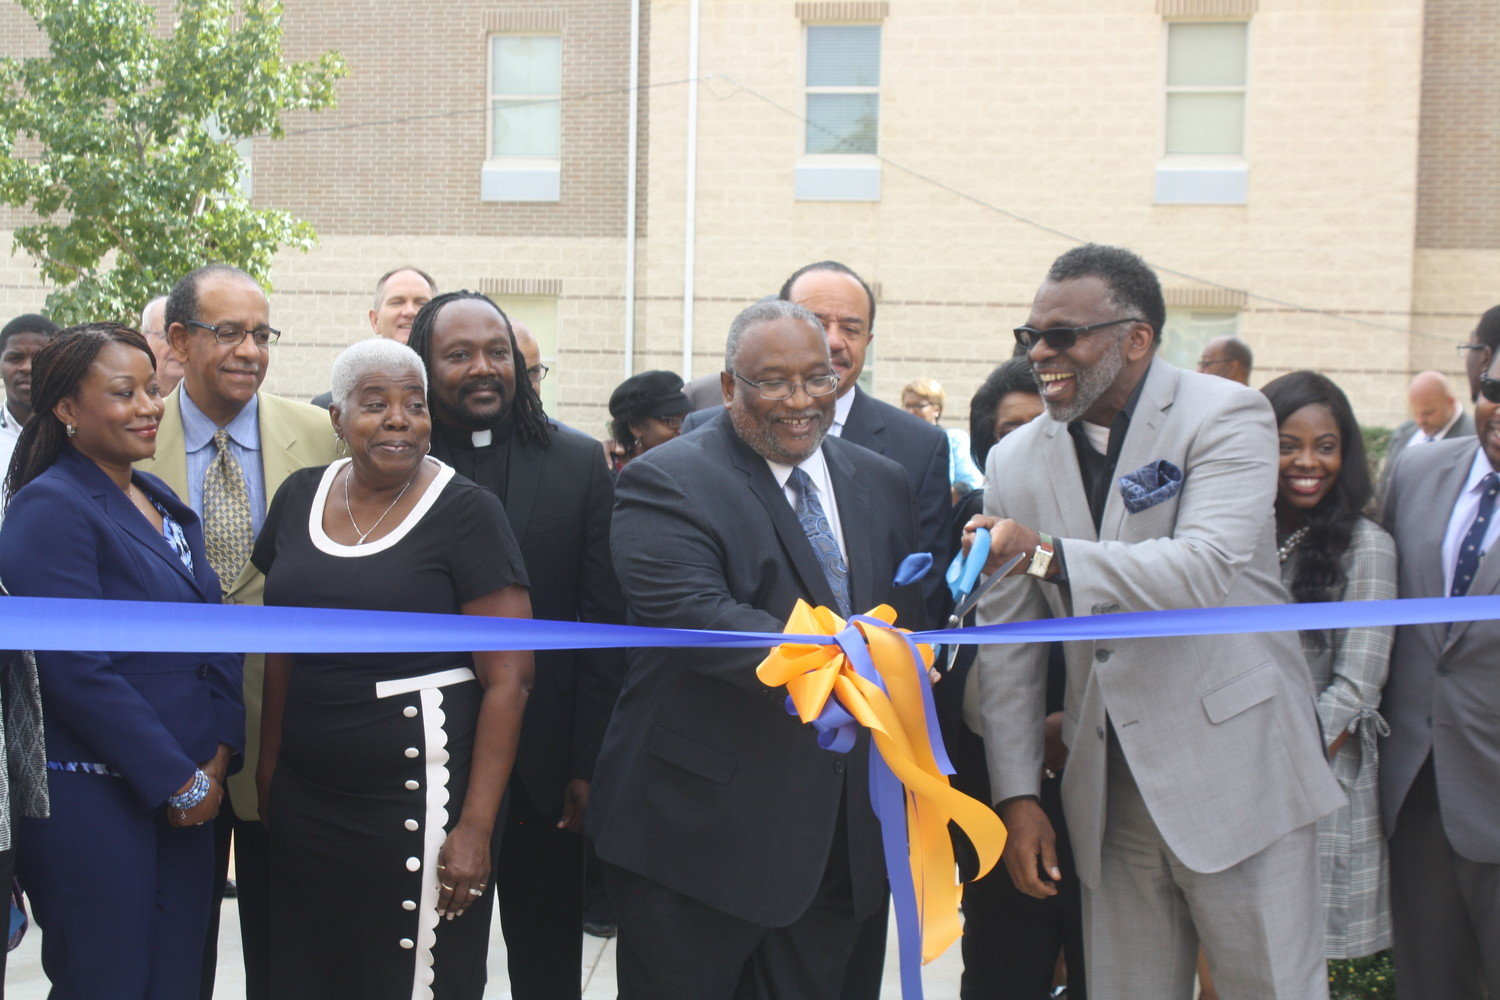 Jarvis Christian College President Dr. Lester C. Newman (left) and Jarvis board of trustees chair and Terrell city manager Reverend Torry L. Edwards  (right) perform the ribbon cutting ceremony to celebrate the opening of the two new residential halls on Oct. 12.